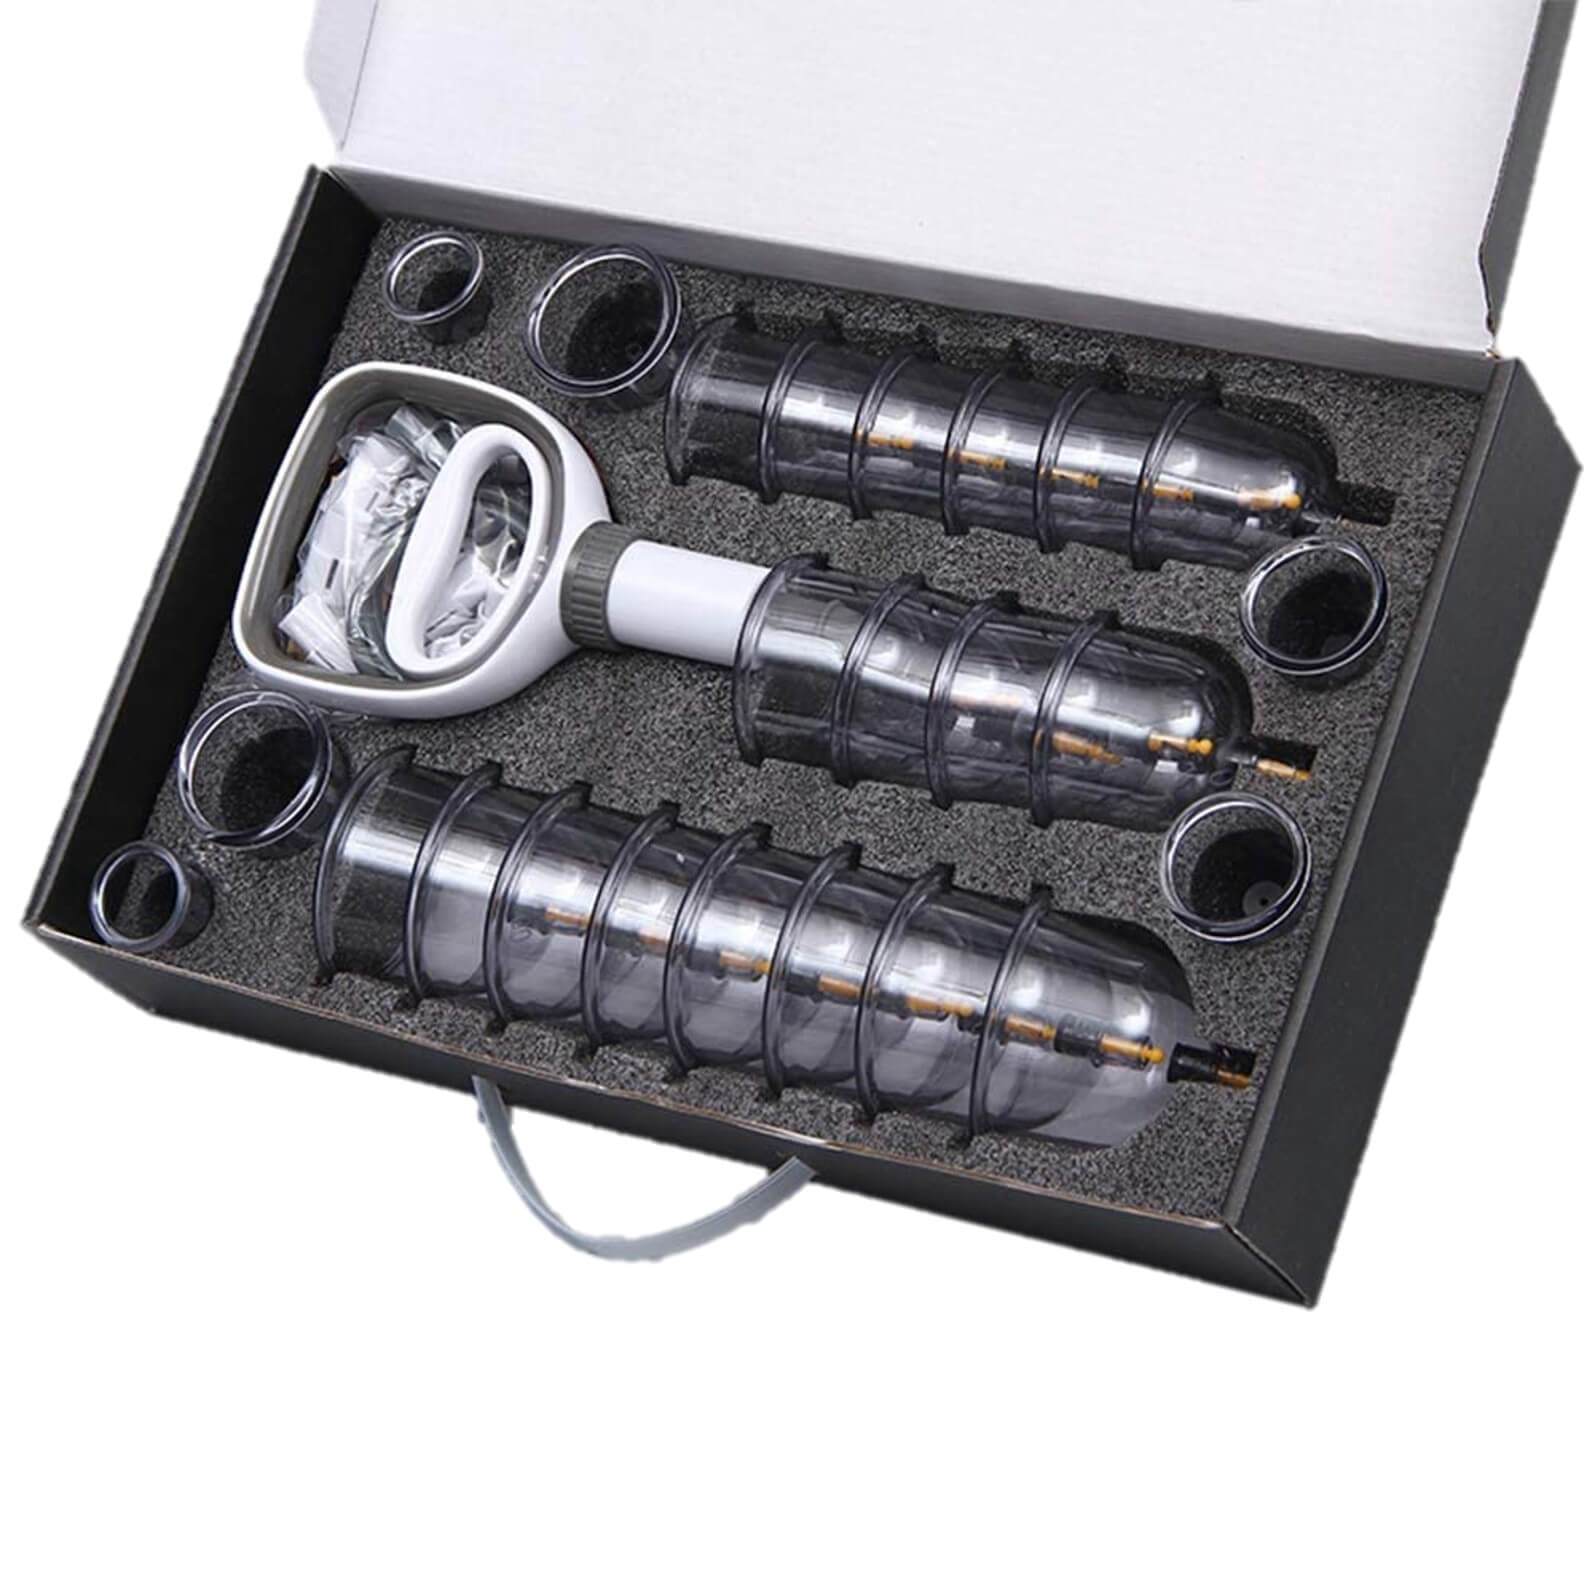 Professional Acupoint Cupping Set, 4th Generation Pump Gun & Cups (24 Cups) - Buy at New Green Nutrition